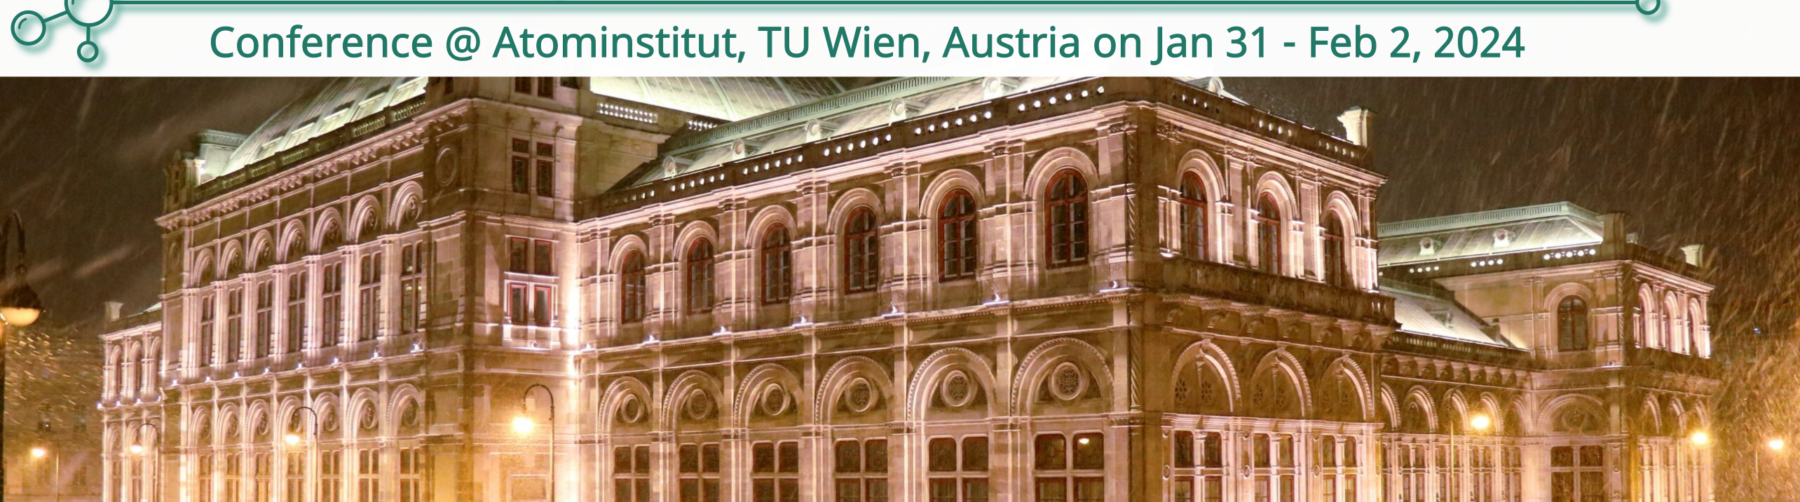 Header image showing the Oper with the title of our conference